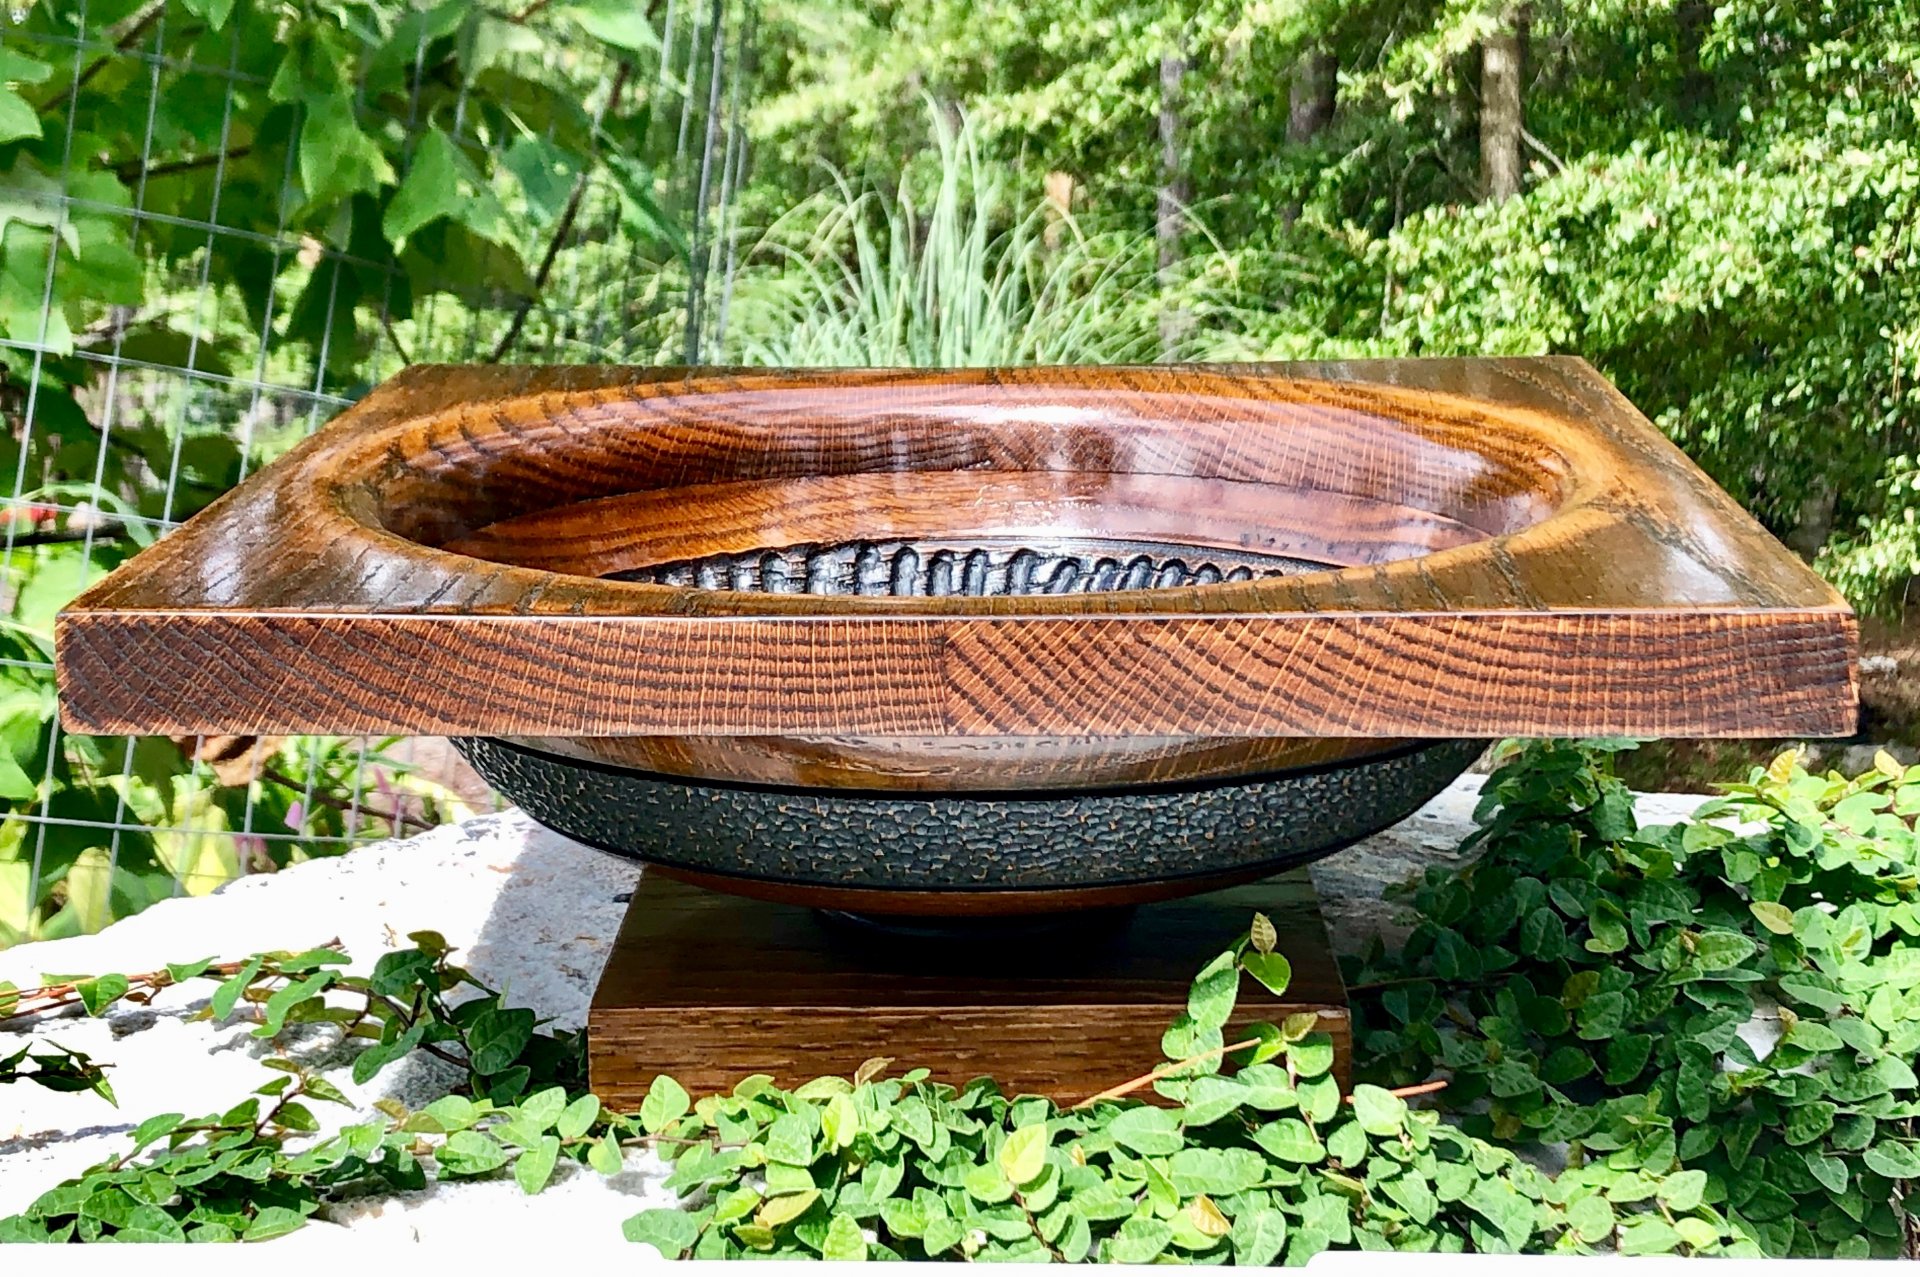 Red Oak replica of Frank Lloyd Wright planter from Robie House in Chicago,